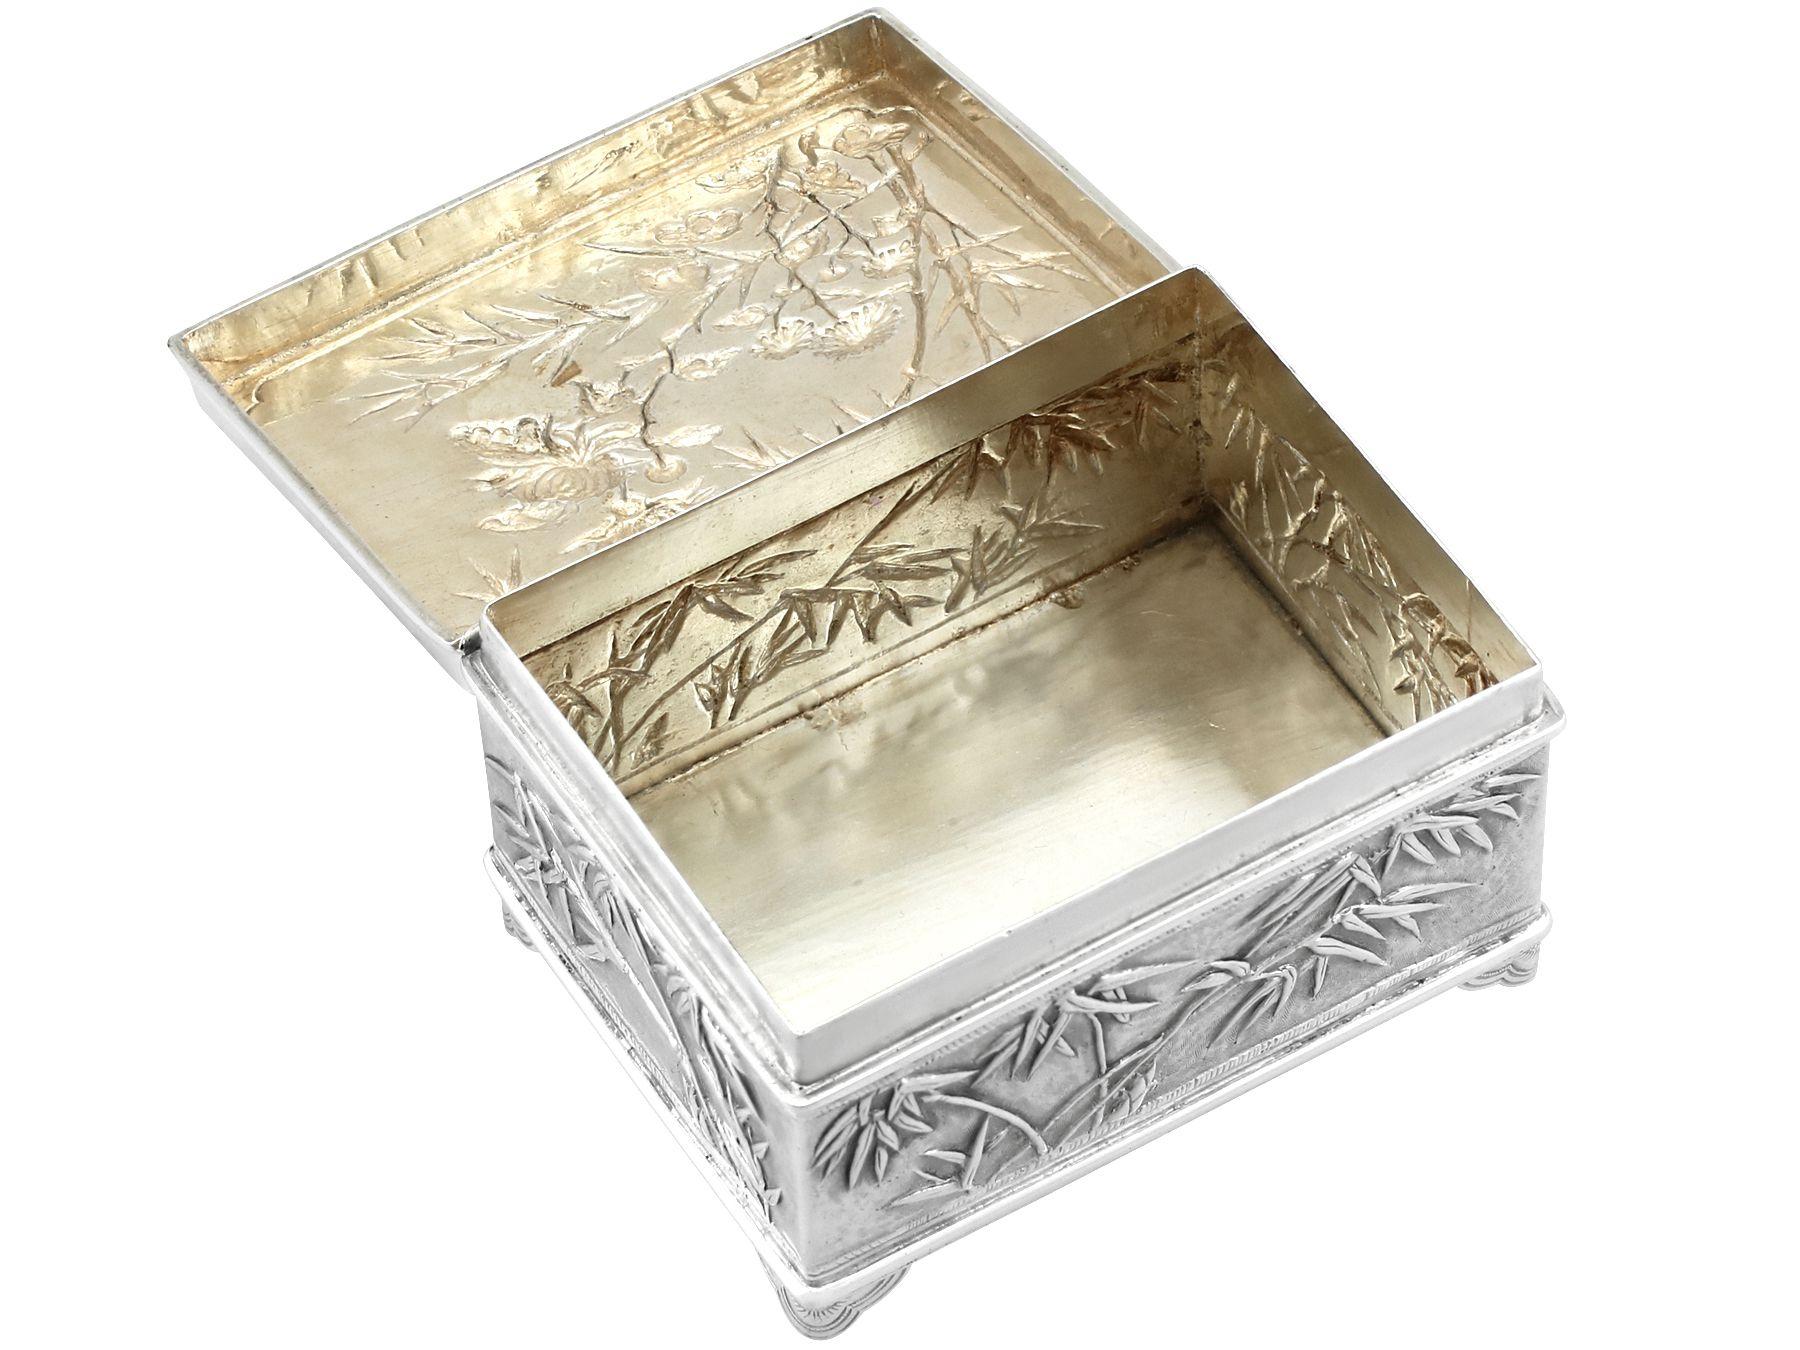 1900s Antique Chinese Export Silver Box For Sale 2